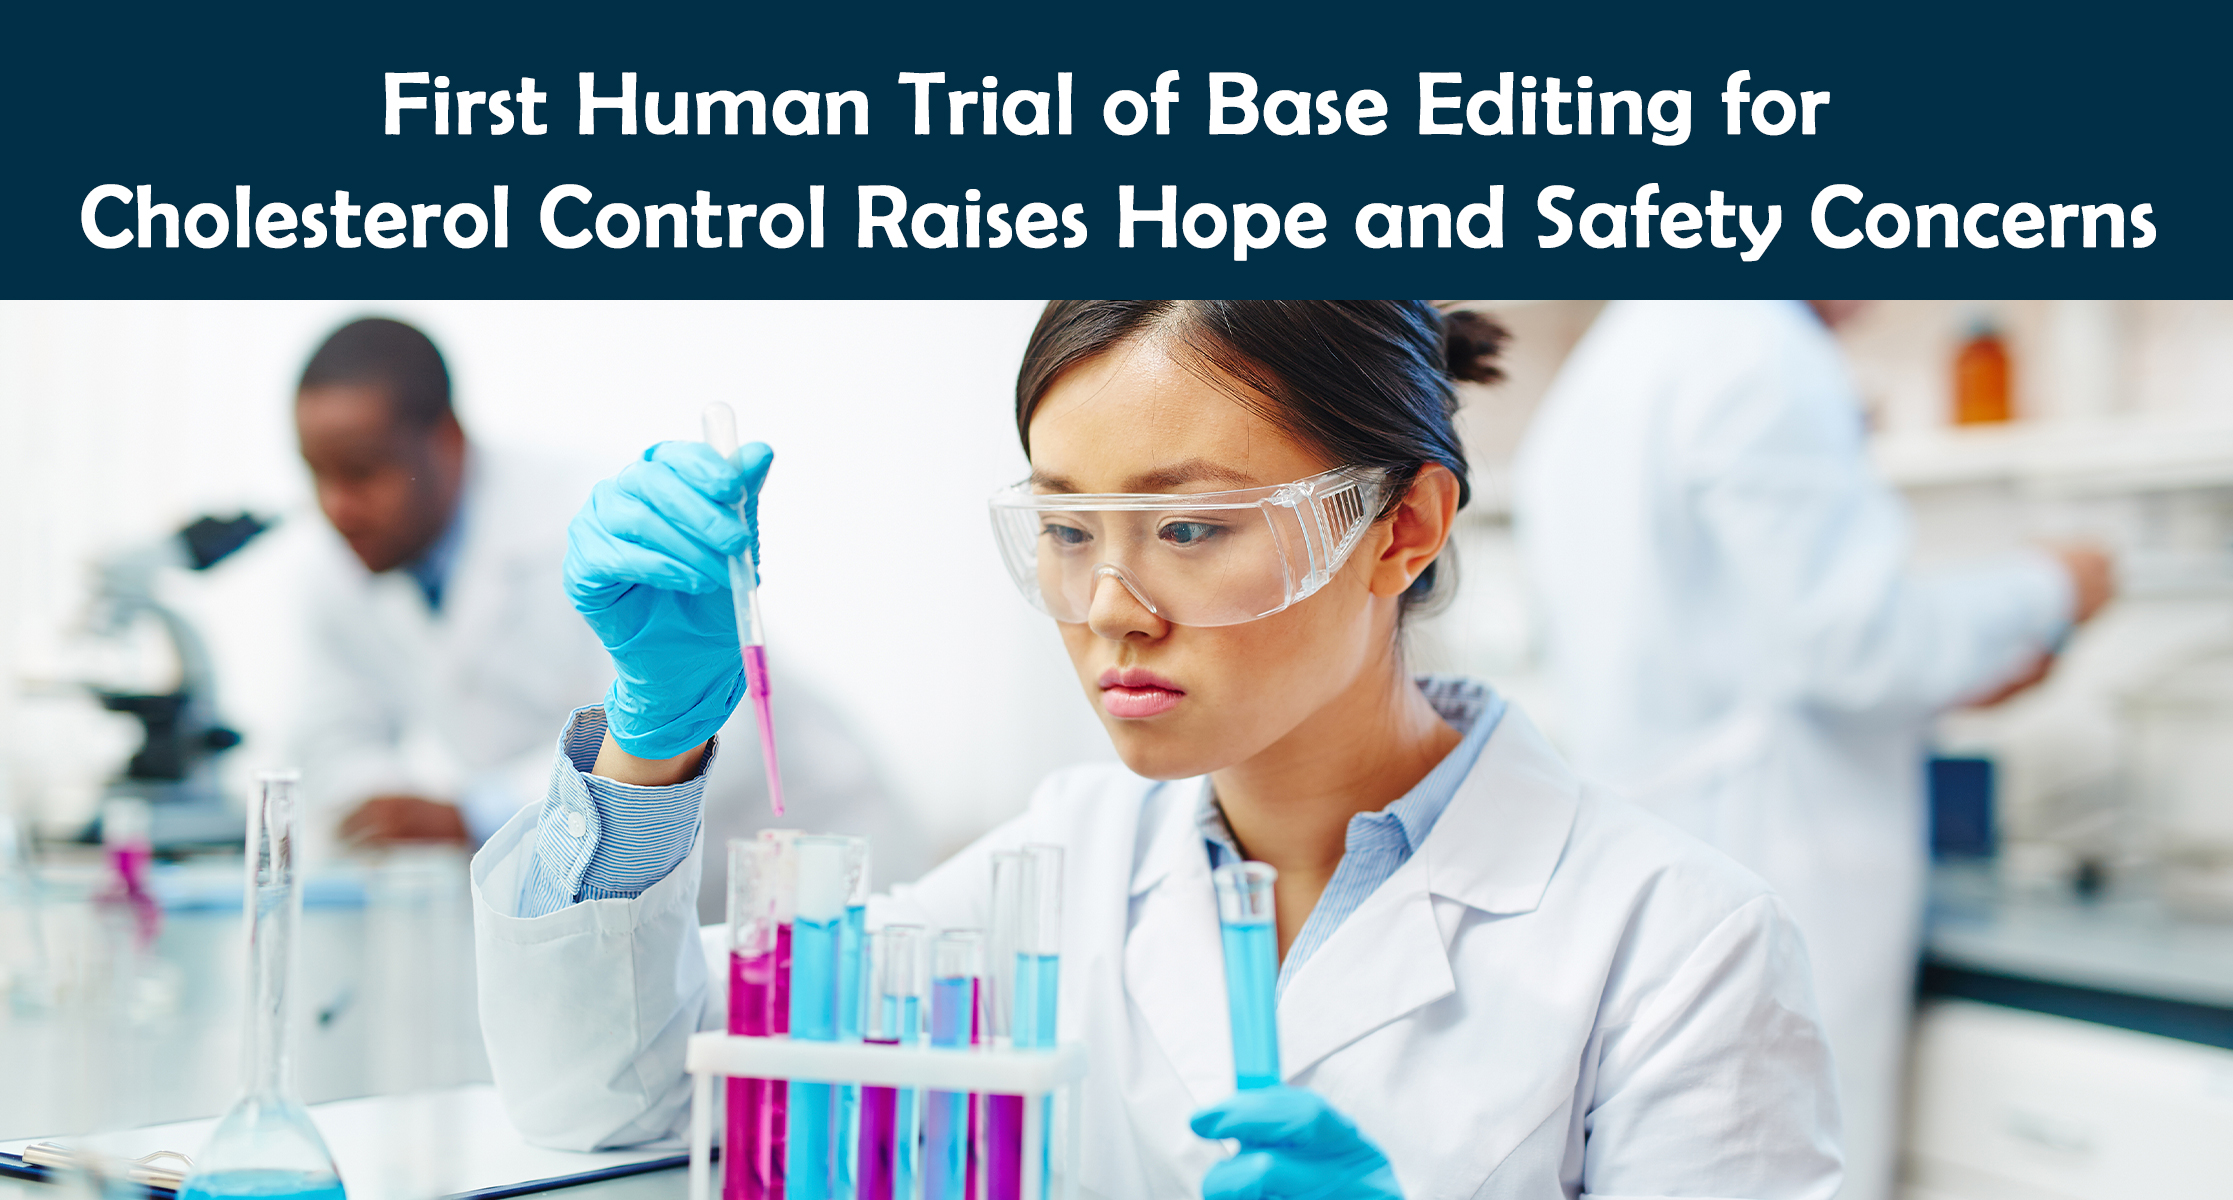 First Human Trial of Base Editing for Cholesterol Control Raises Hope and Safety Concerns